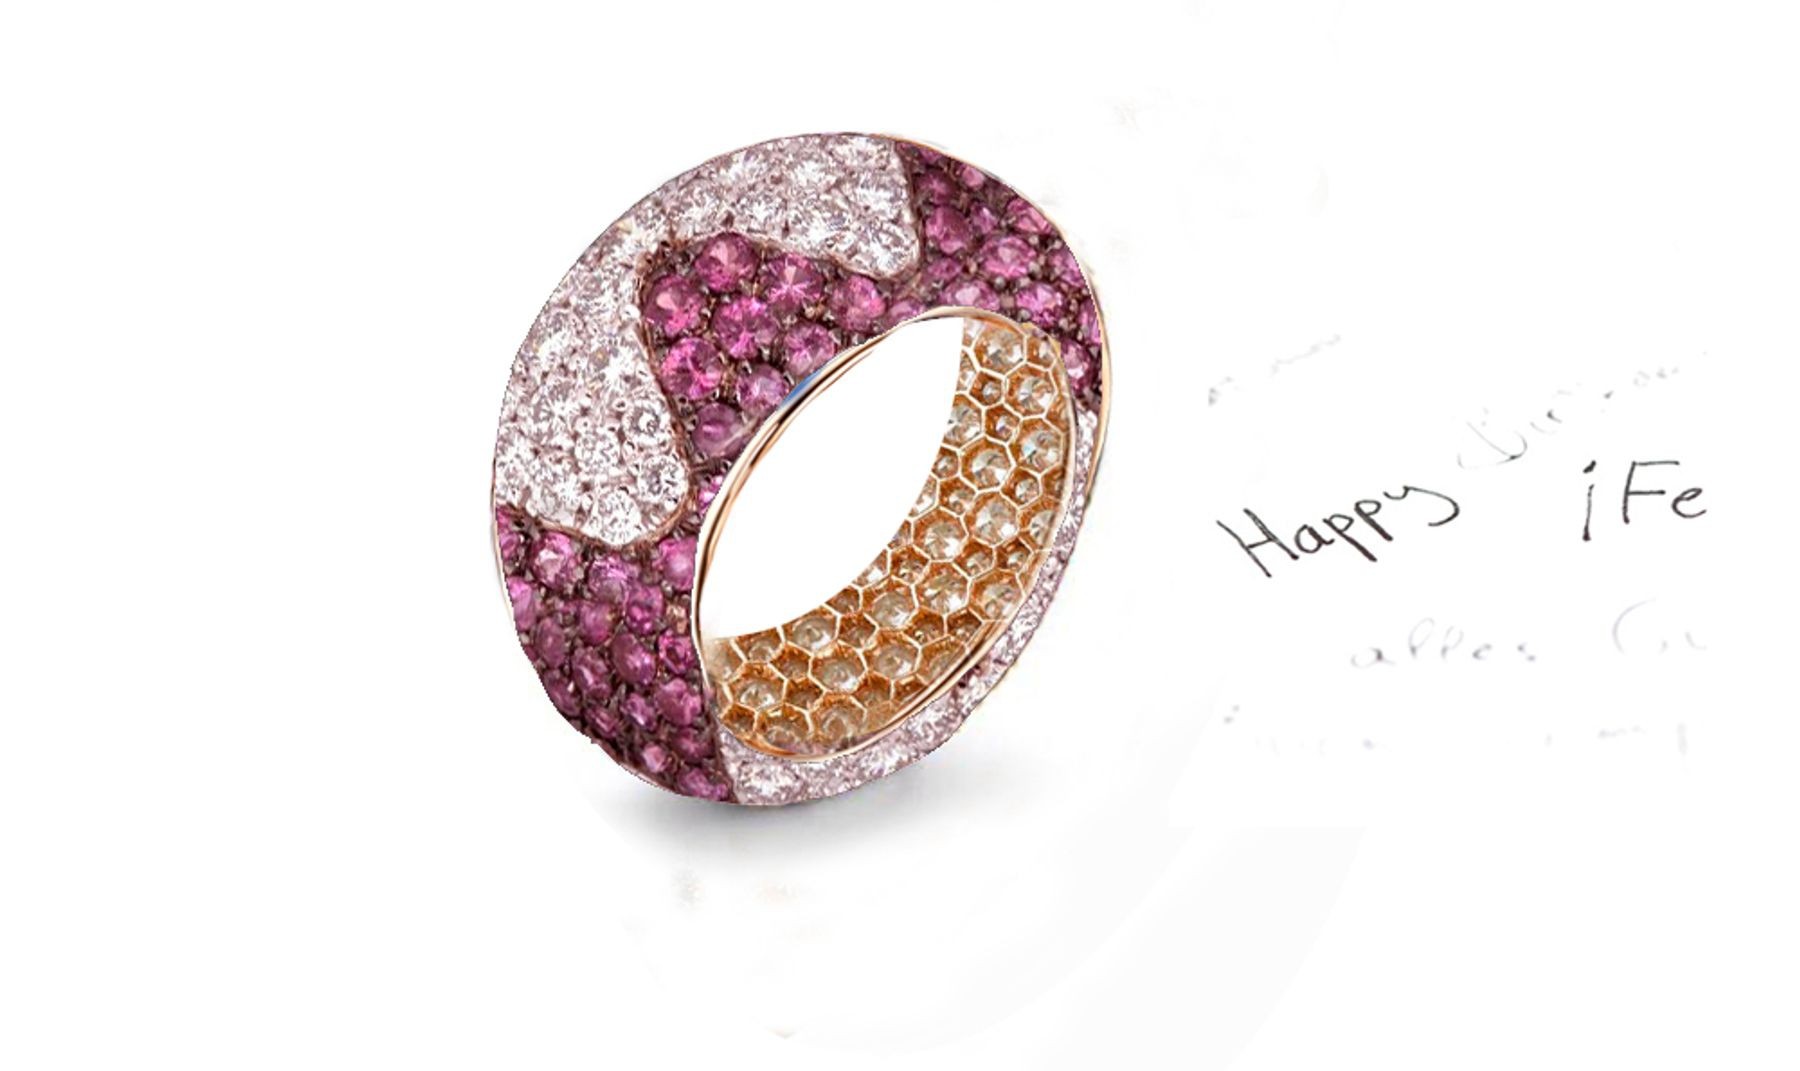 Represent Your Eternal Love With Custom Manufactured Diamonds & Colored Gemstones Eternity Rings & Bands